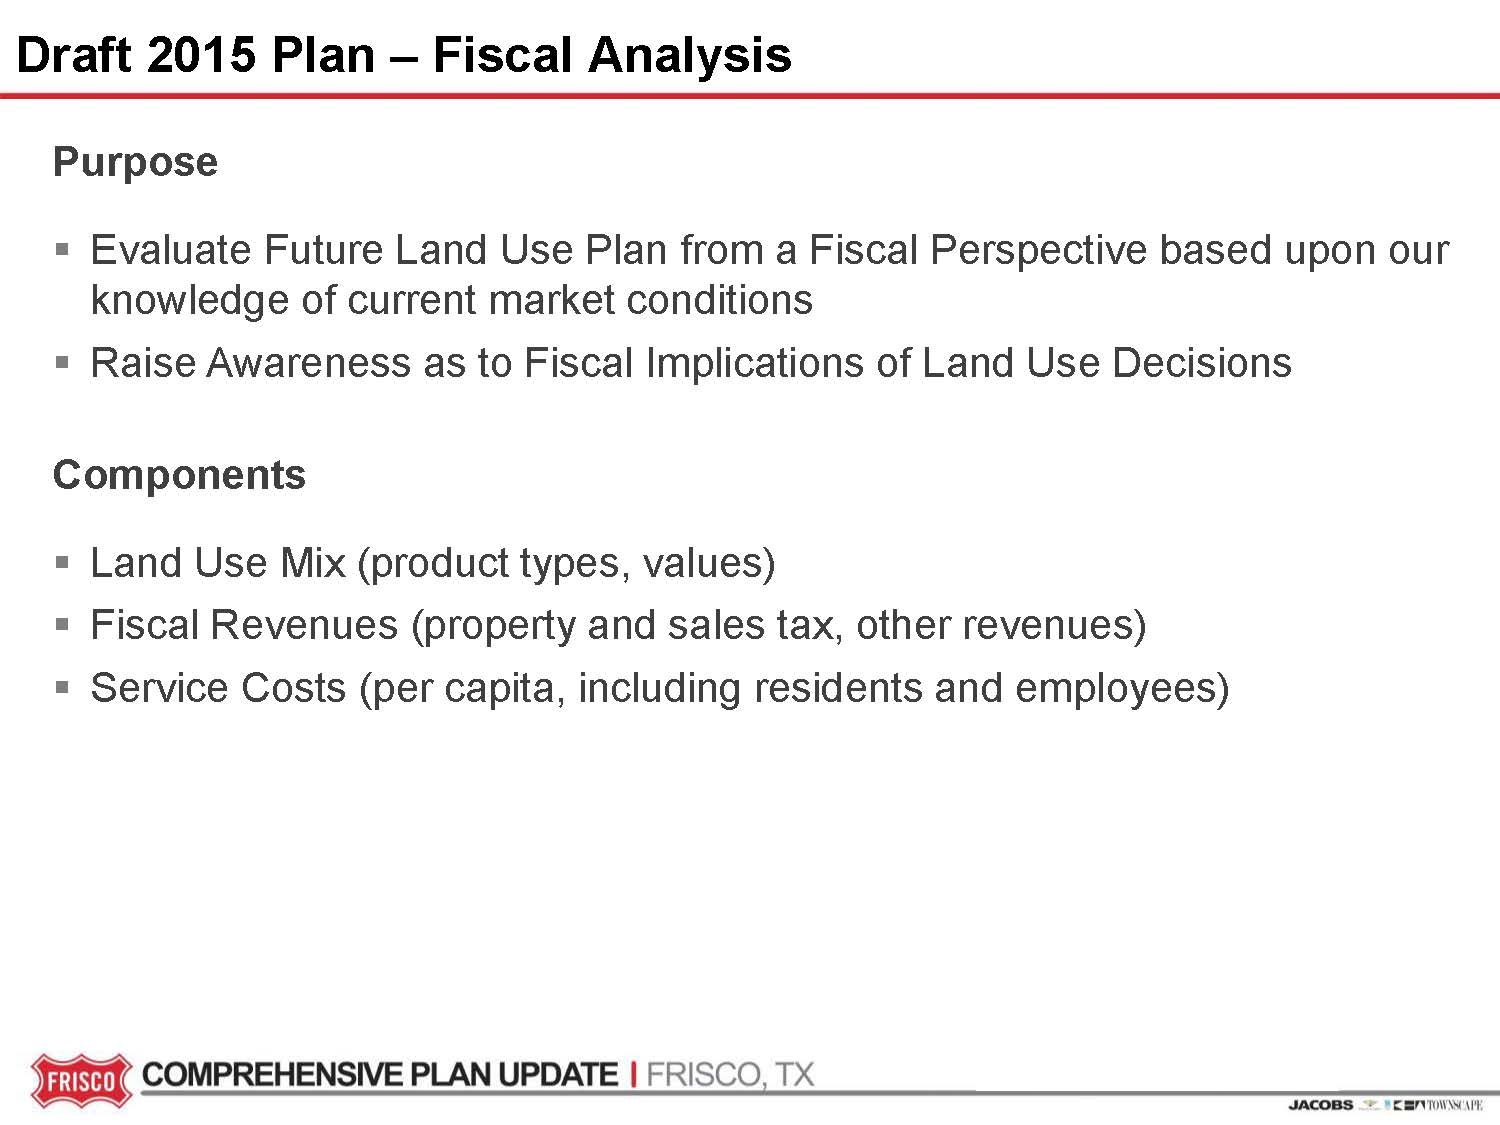 Review the draft 2015 Comprehensive Plan